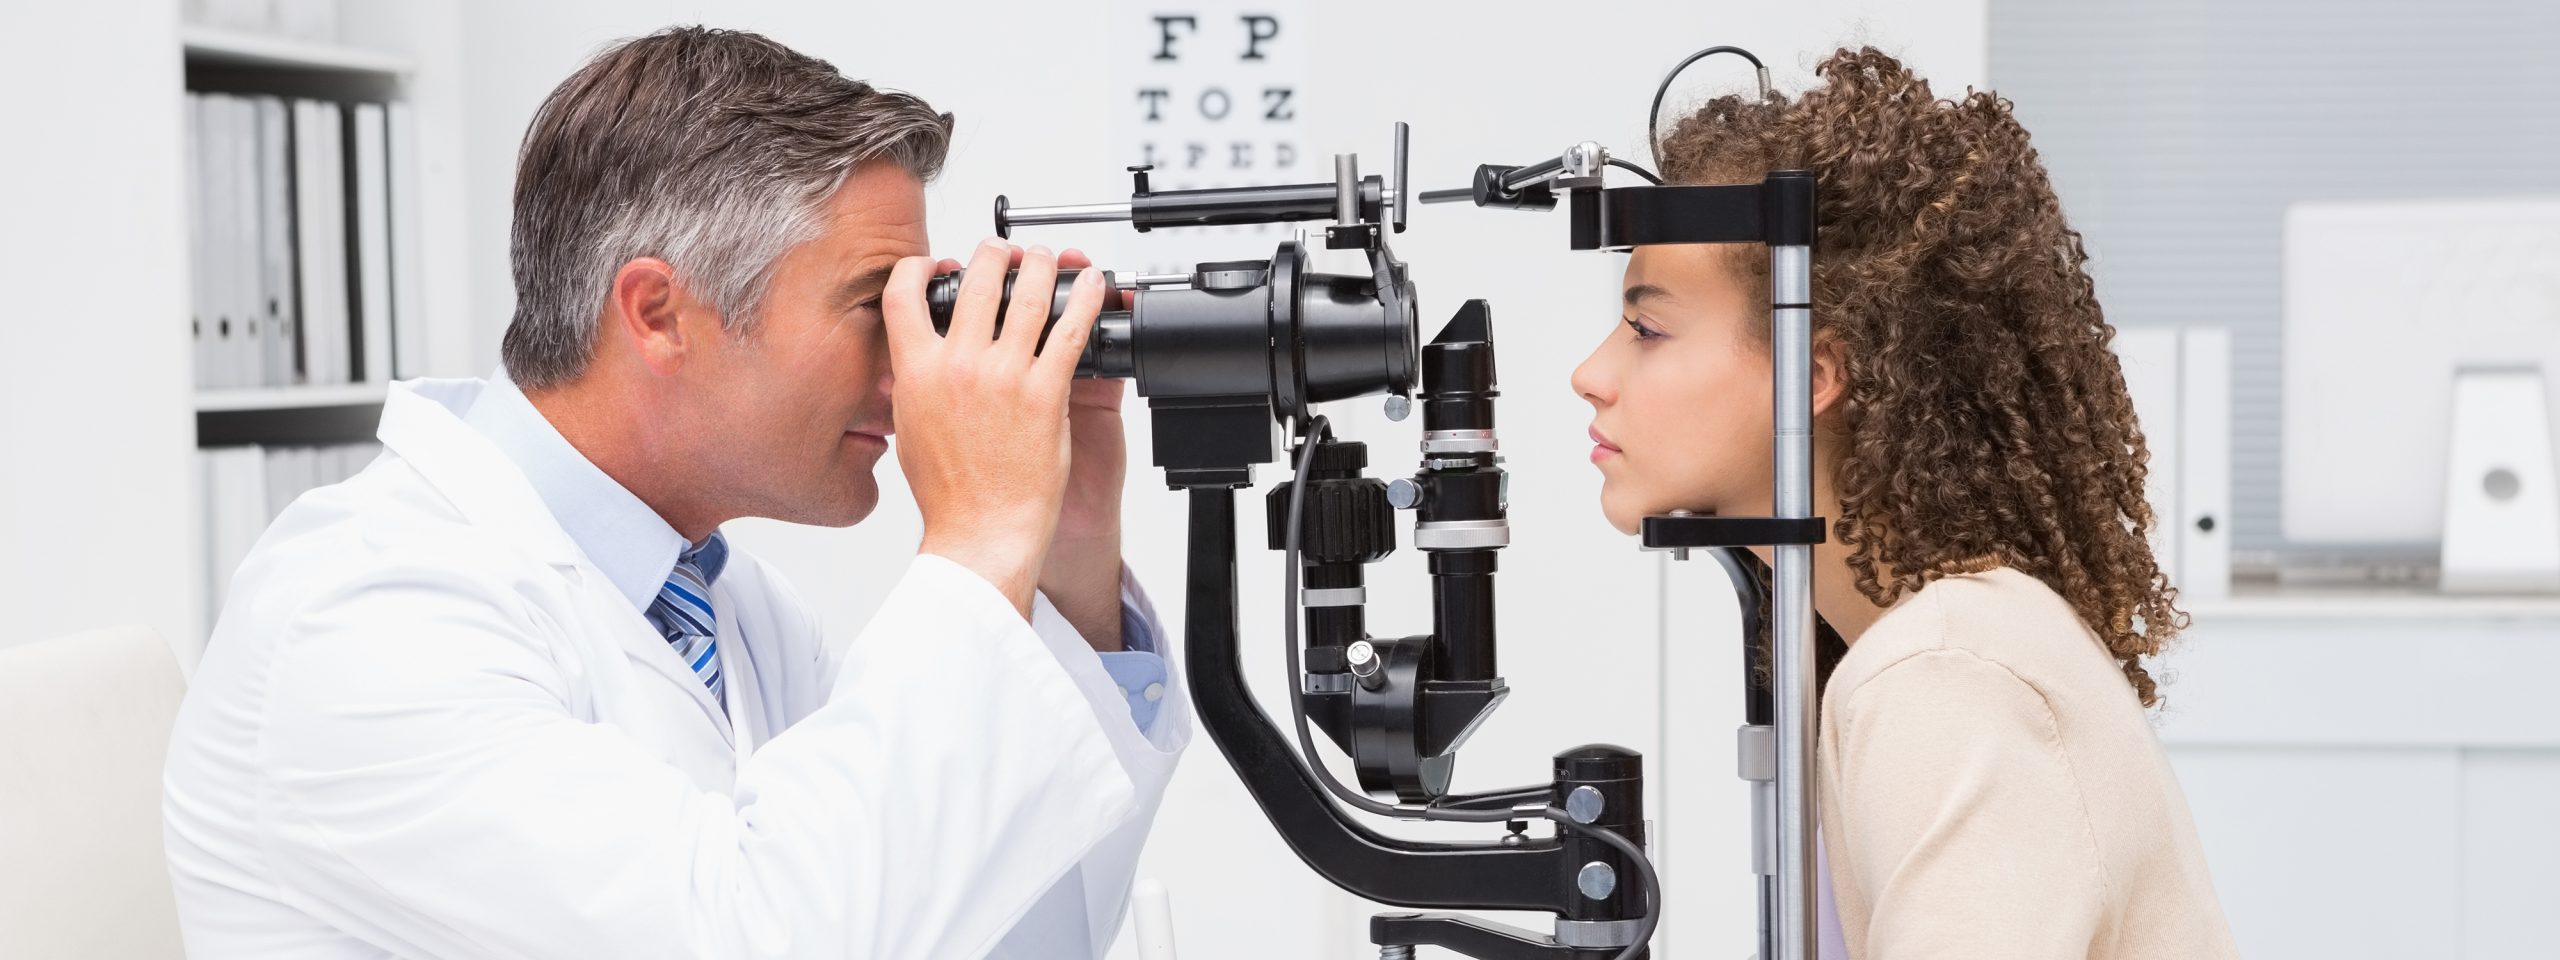 Optometry Schools: Providing Comprehensive Eye Exams and Vision Care